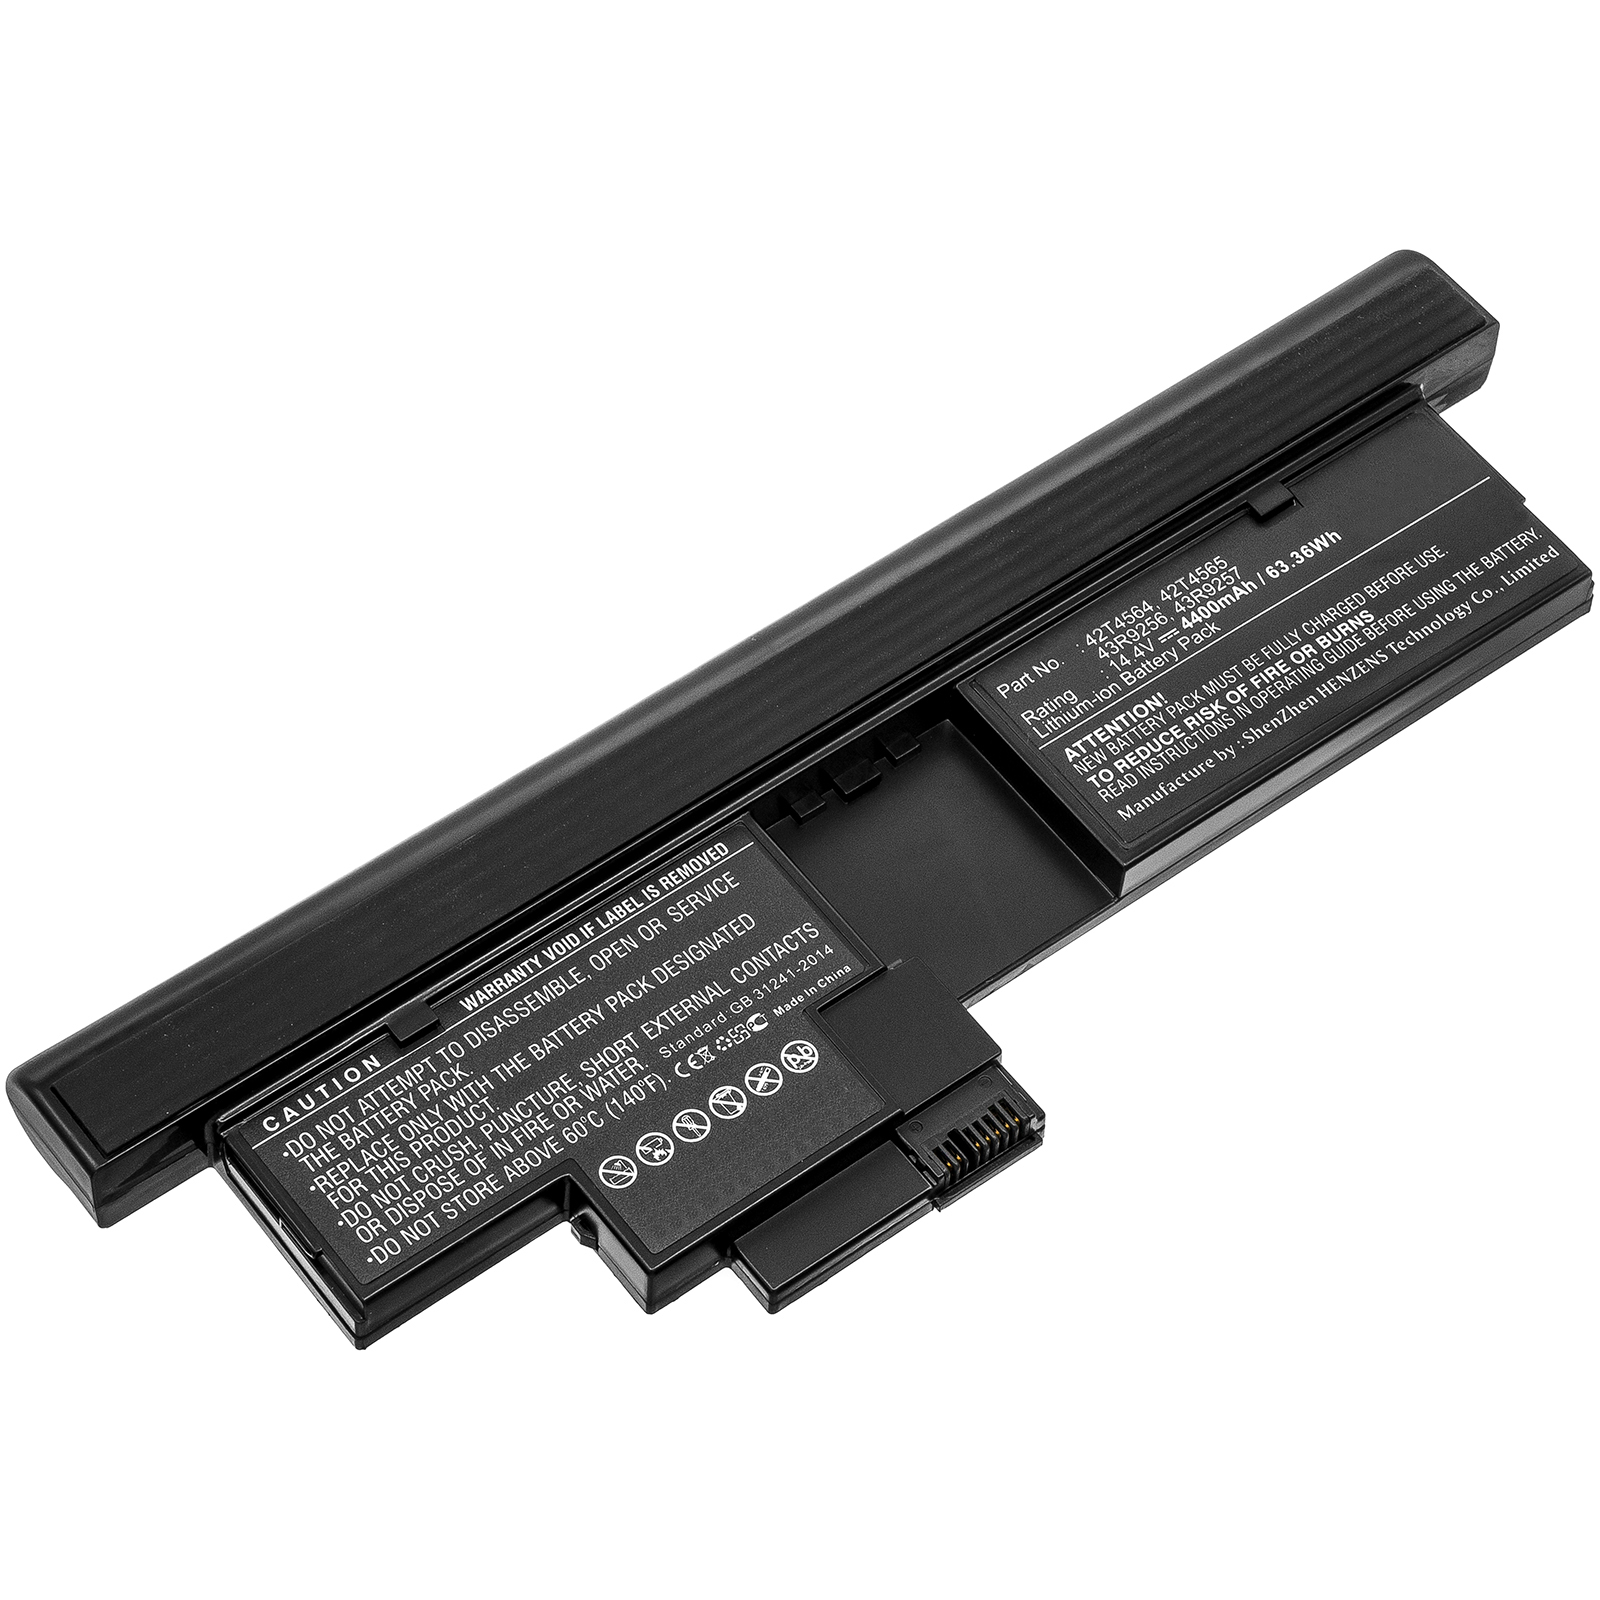 Synergy Digital Laptop Battery, Compatible with IBM 42T4564 Laptop Battery (Li-ion, 14.4V, 4400mAh)